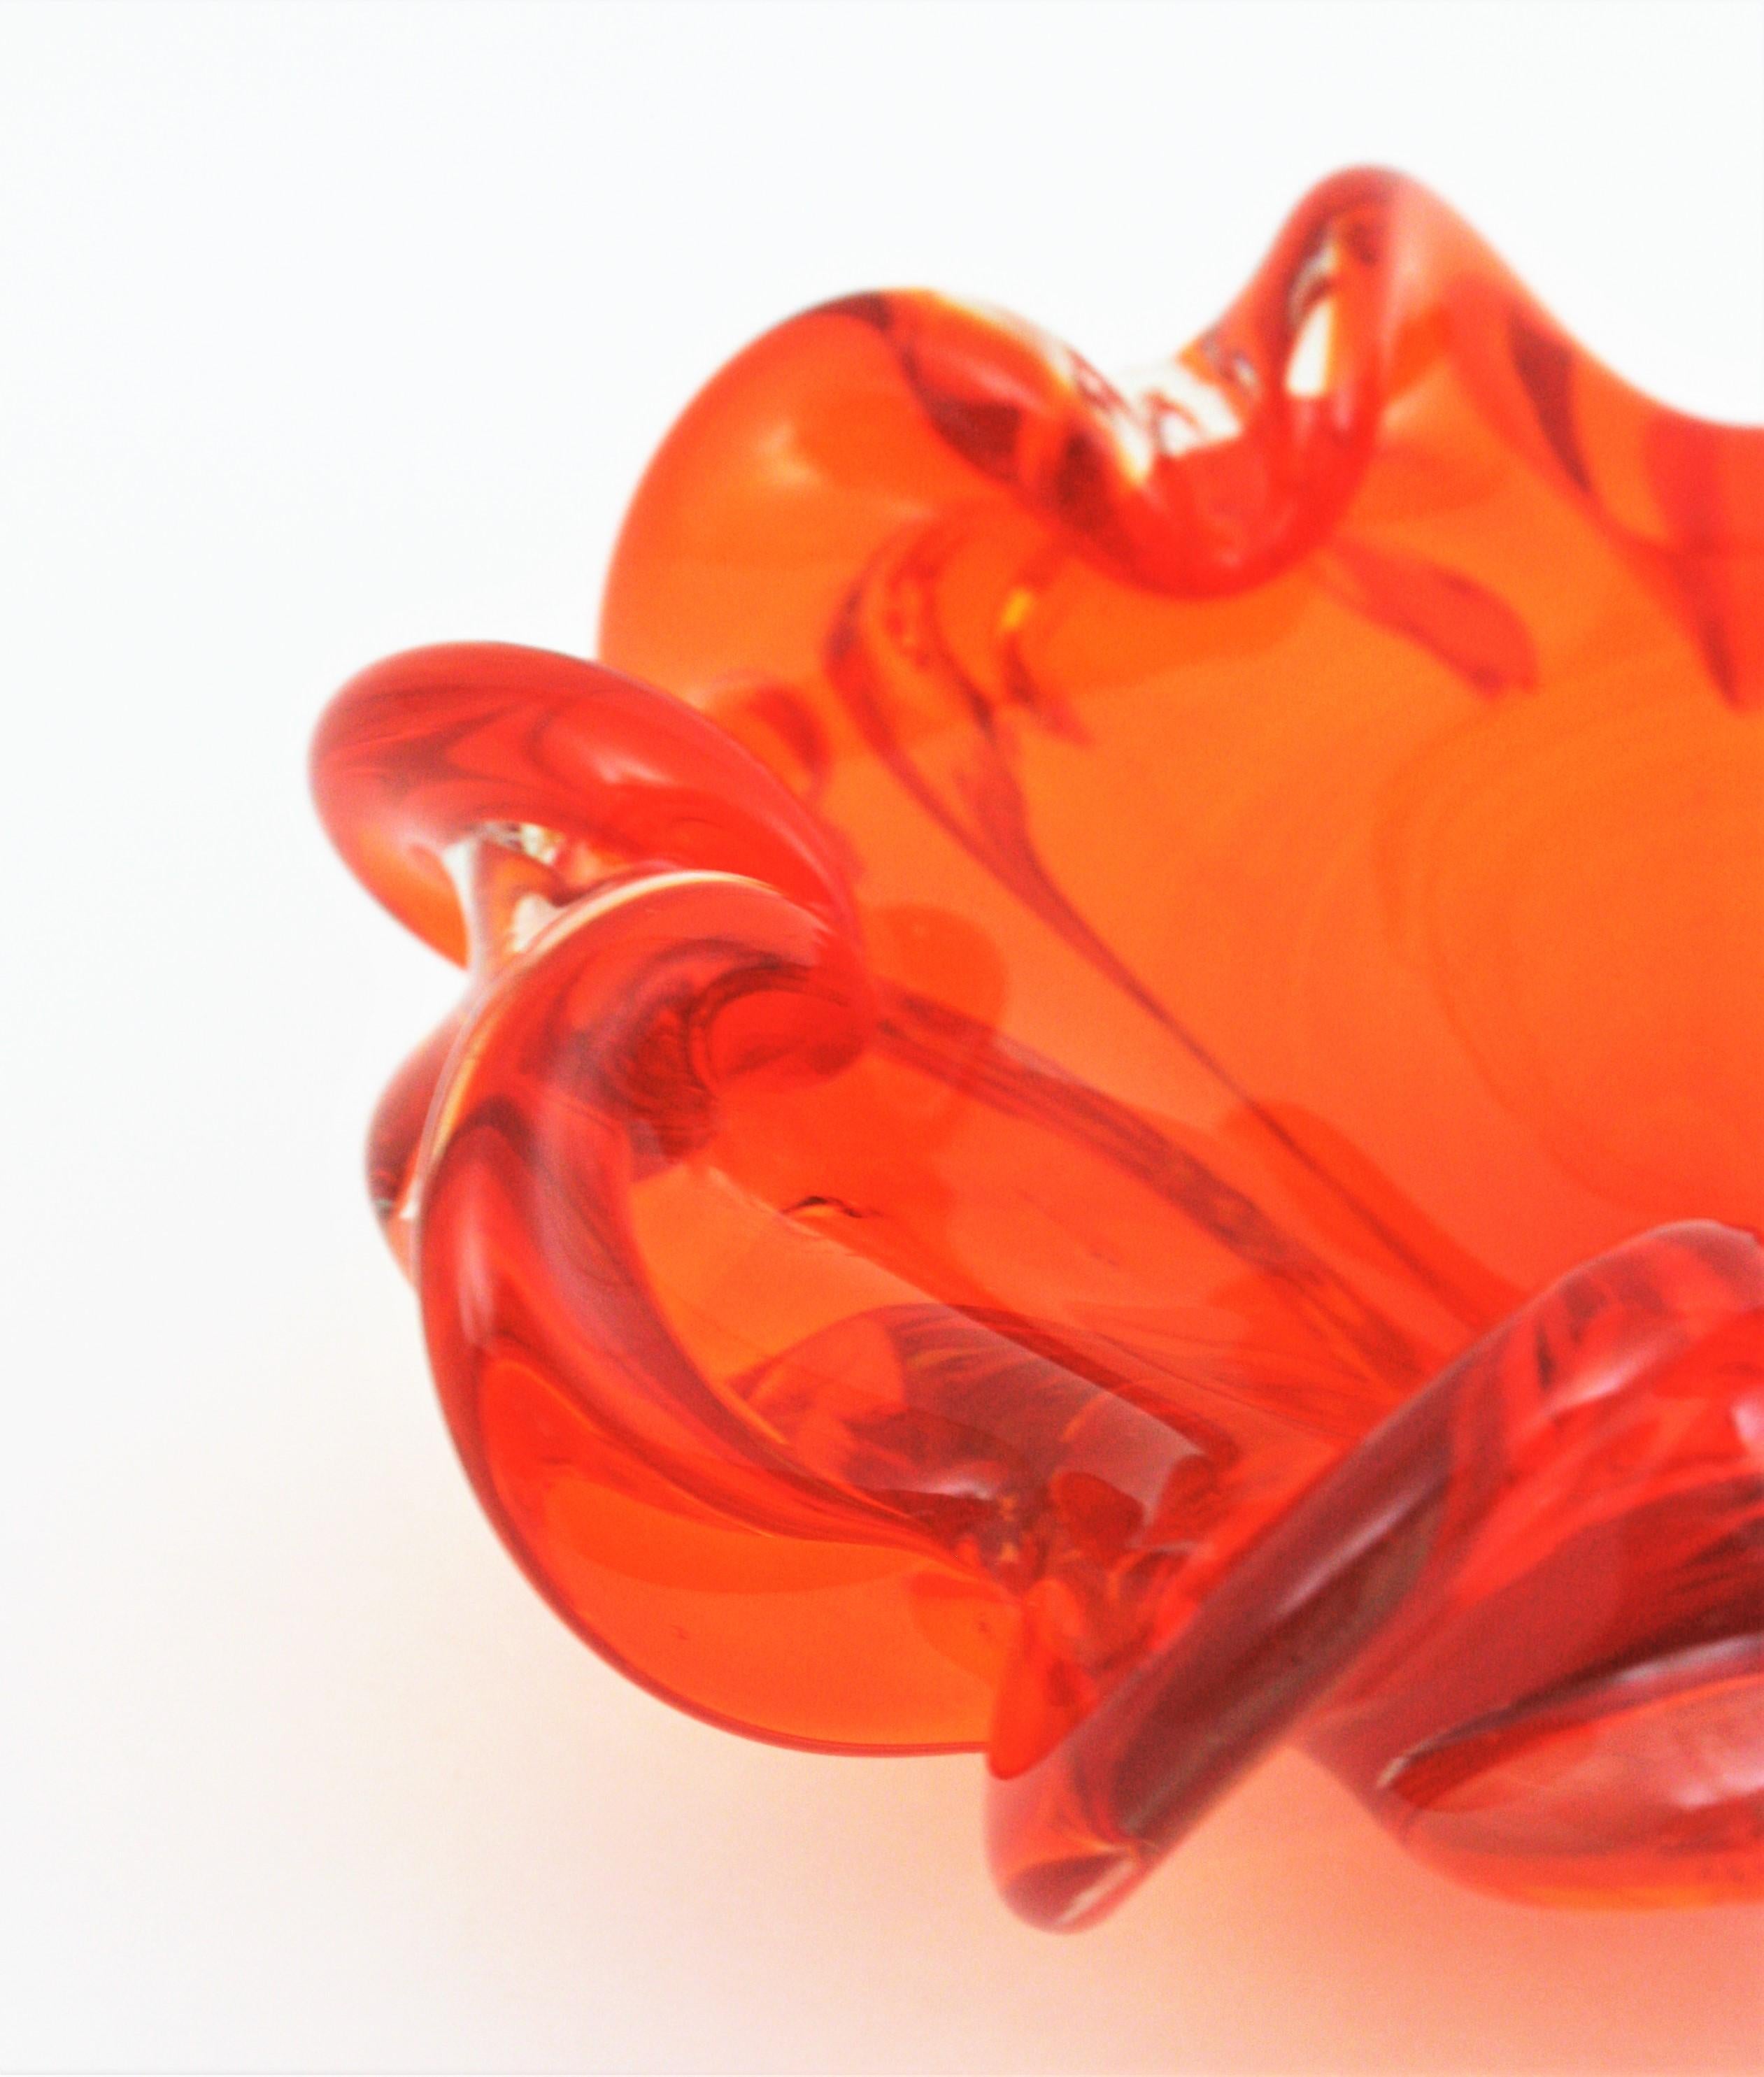 Midcentury Italian Murano Sommerso Orange and Clear Art Glass Bowl / Ashtray For Sale 5